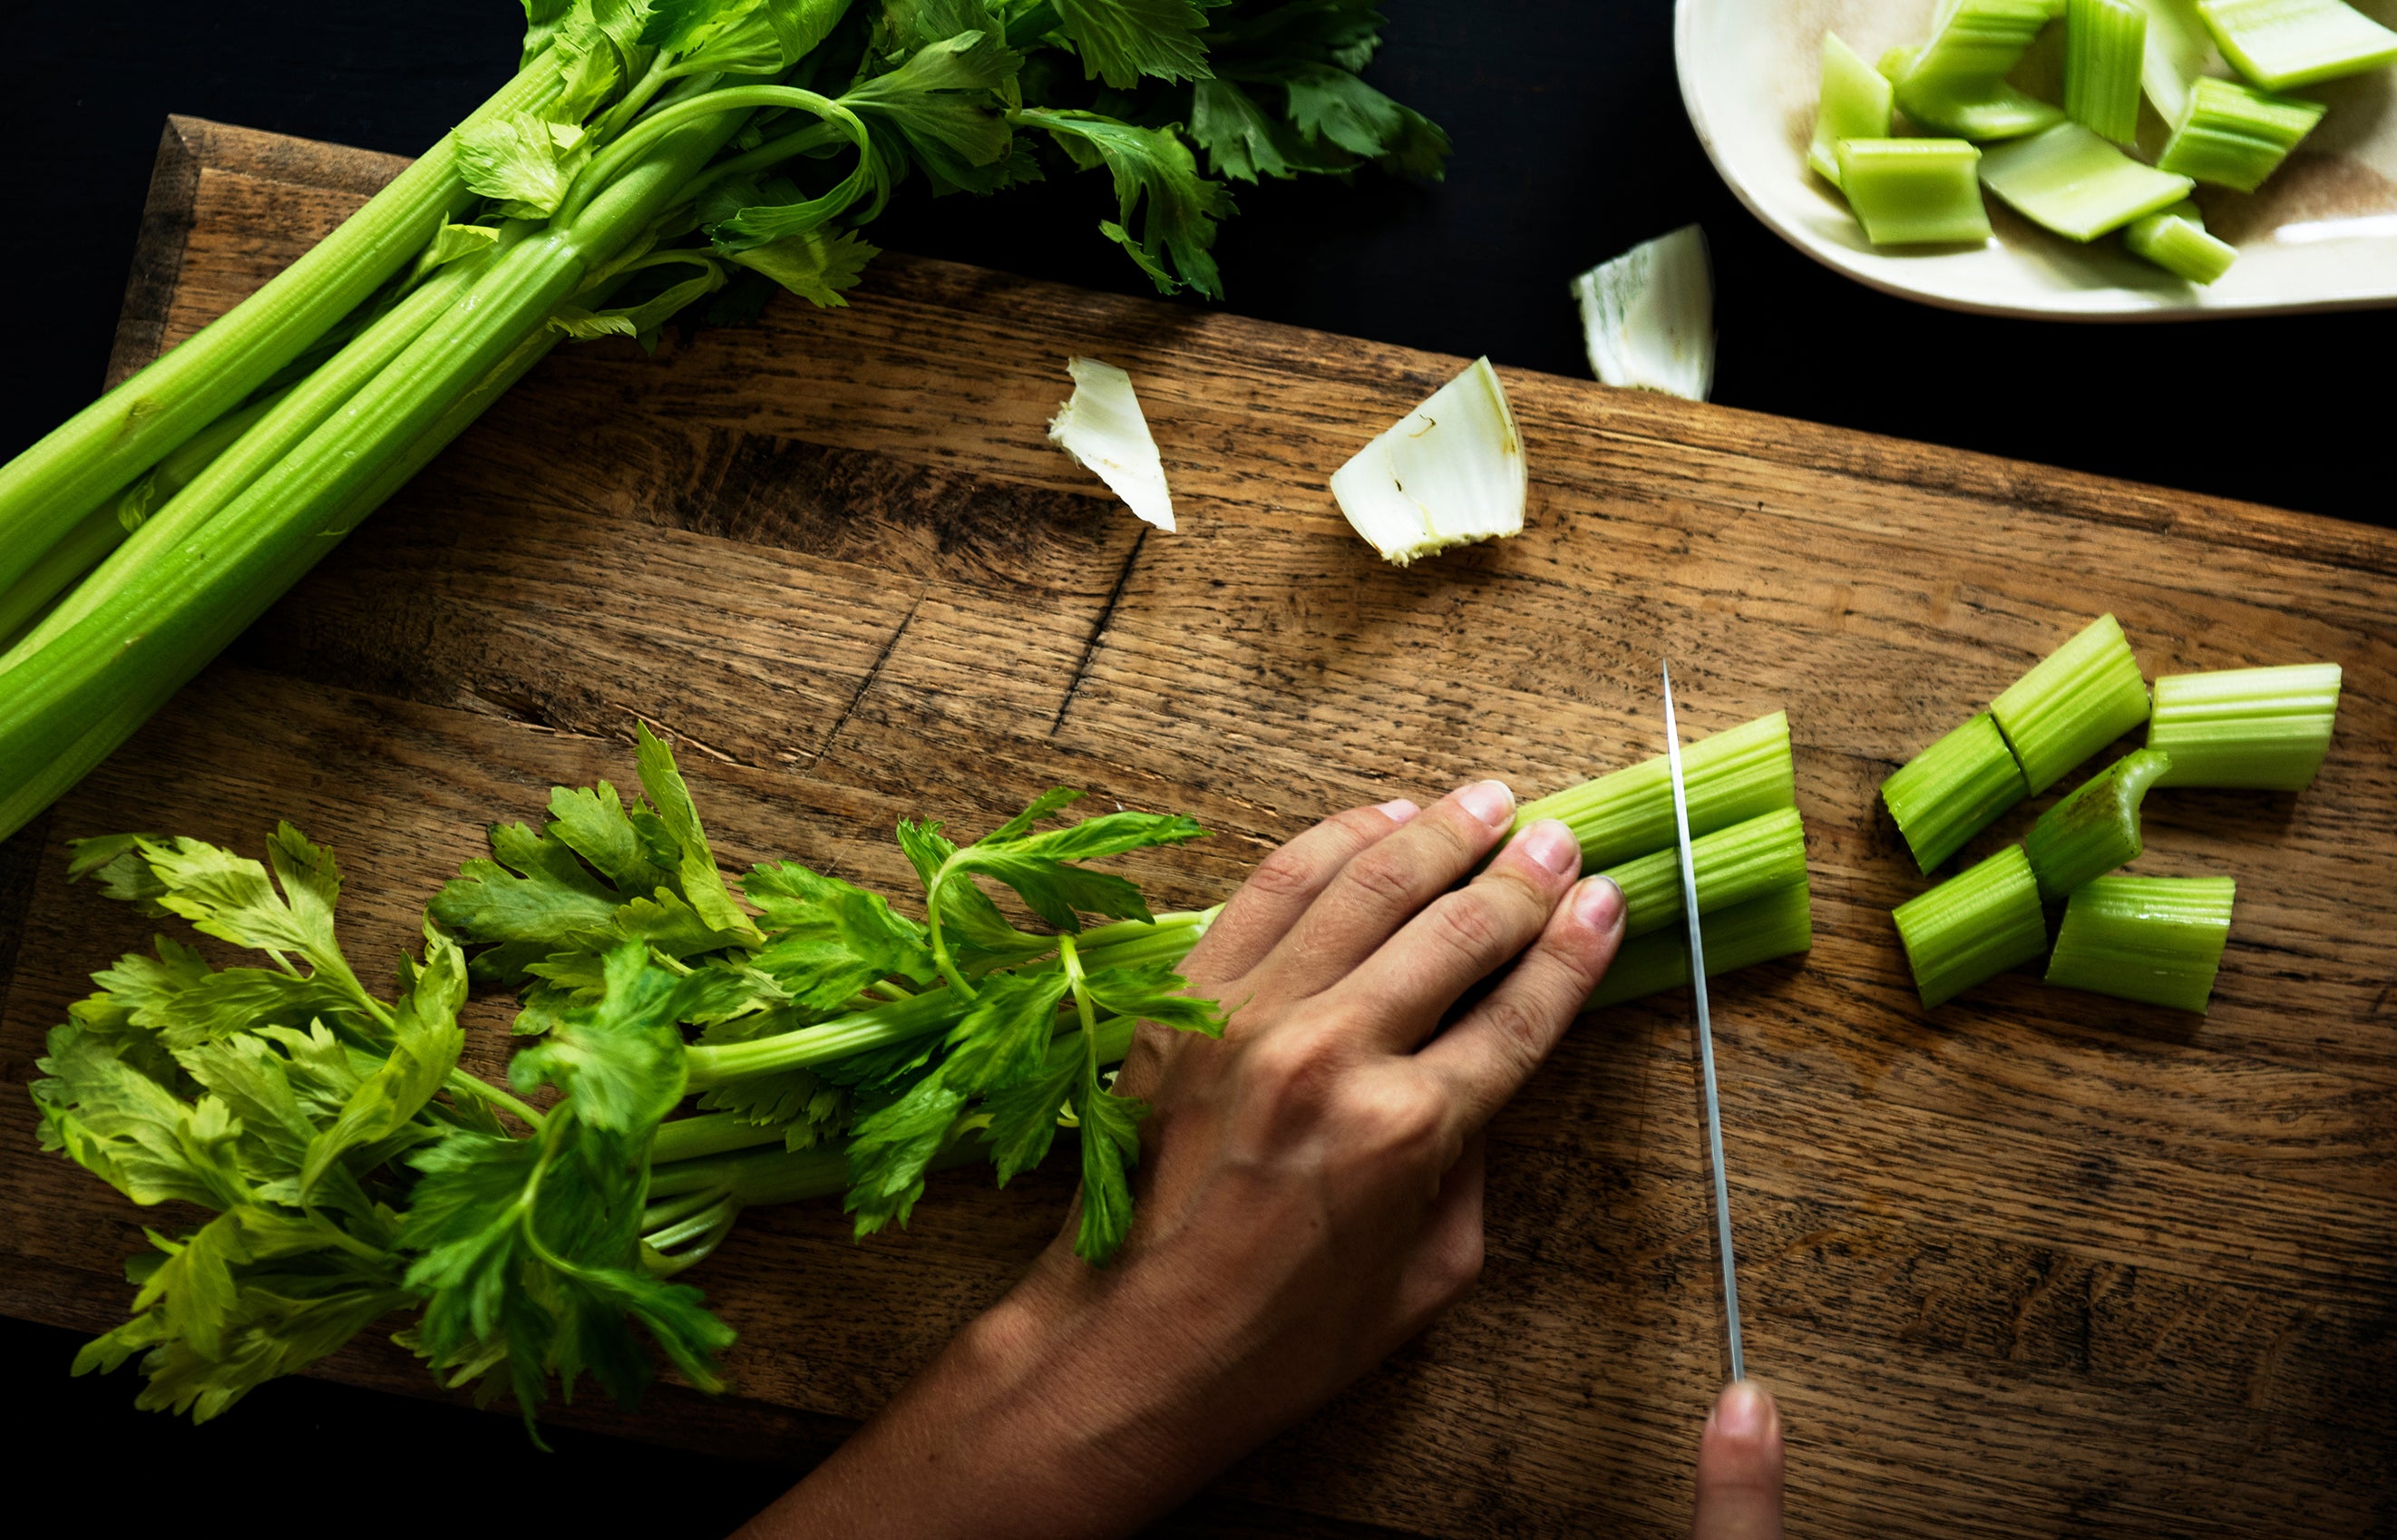 Chopping up fresh celery used in Kekoa Foods baby food pouches.